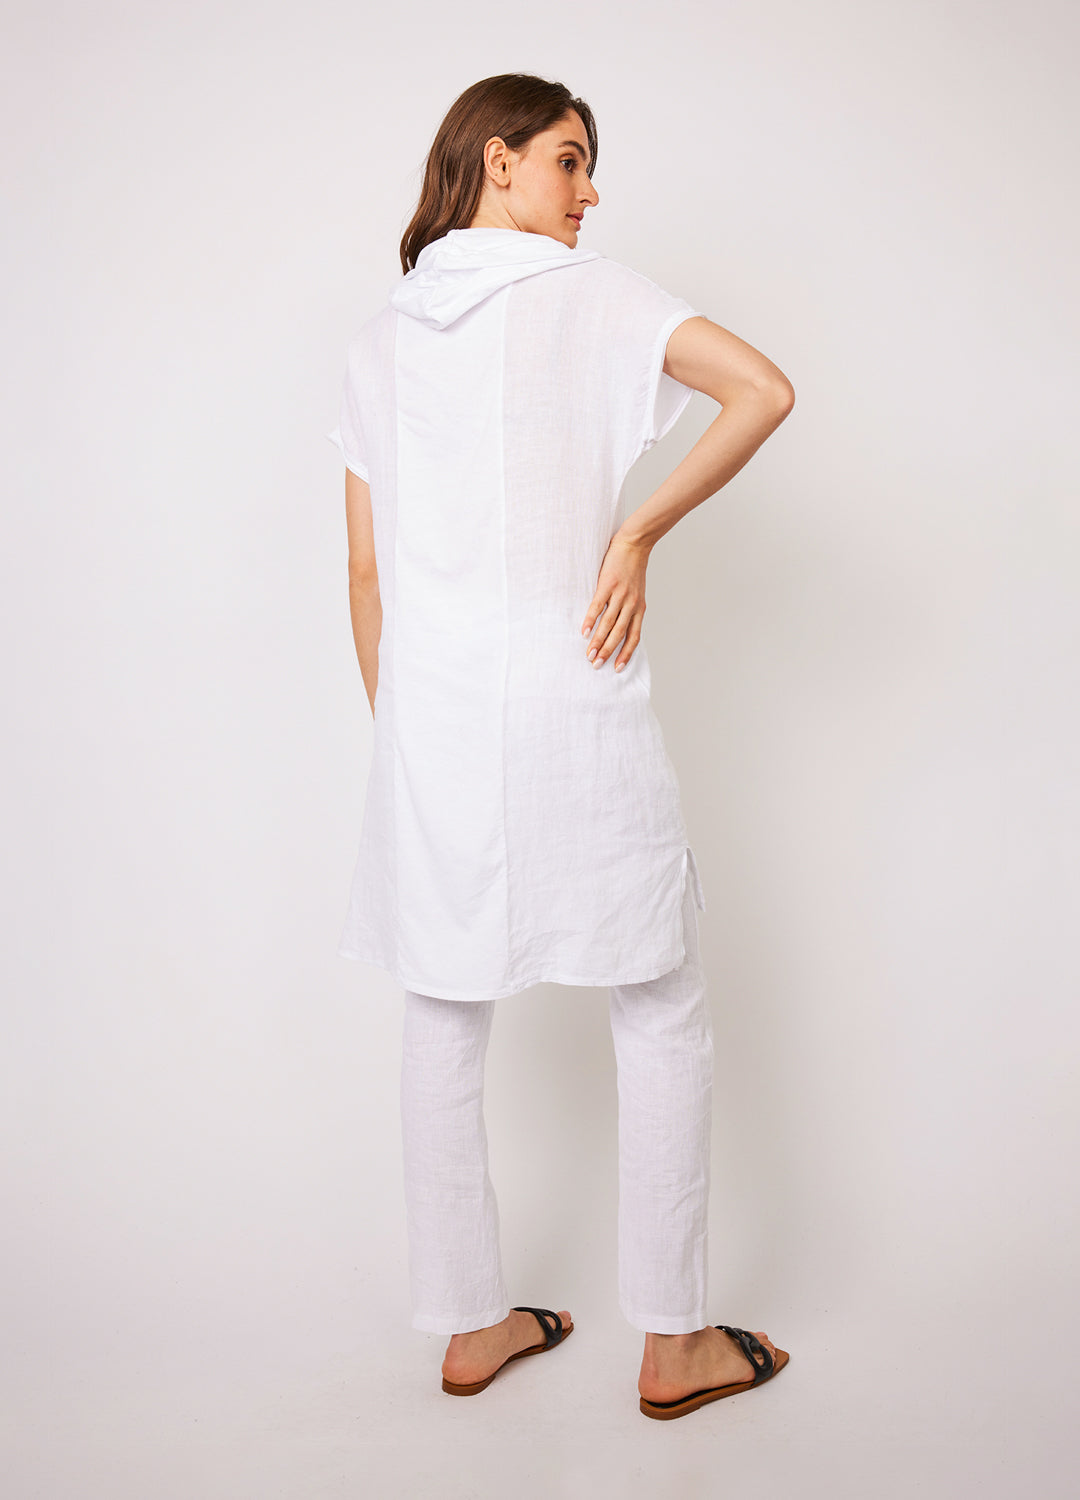 Linen and Jersey Cotton Hooded Dress - White